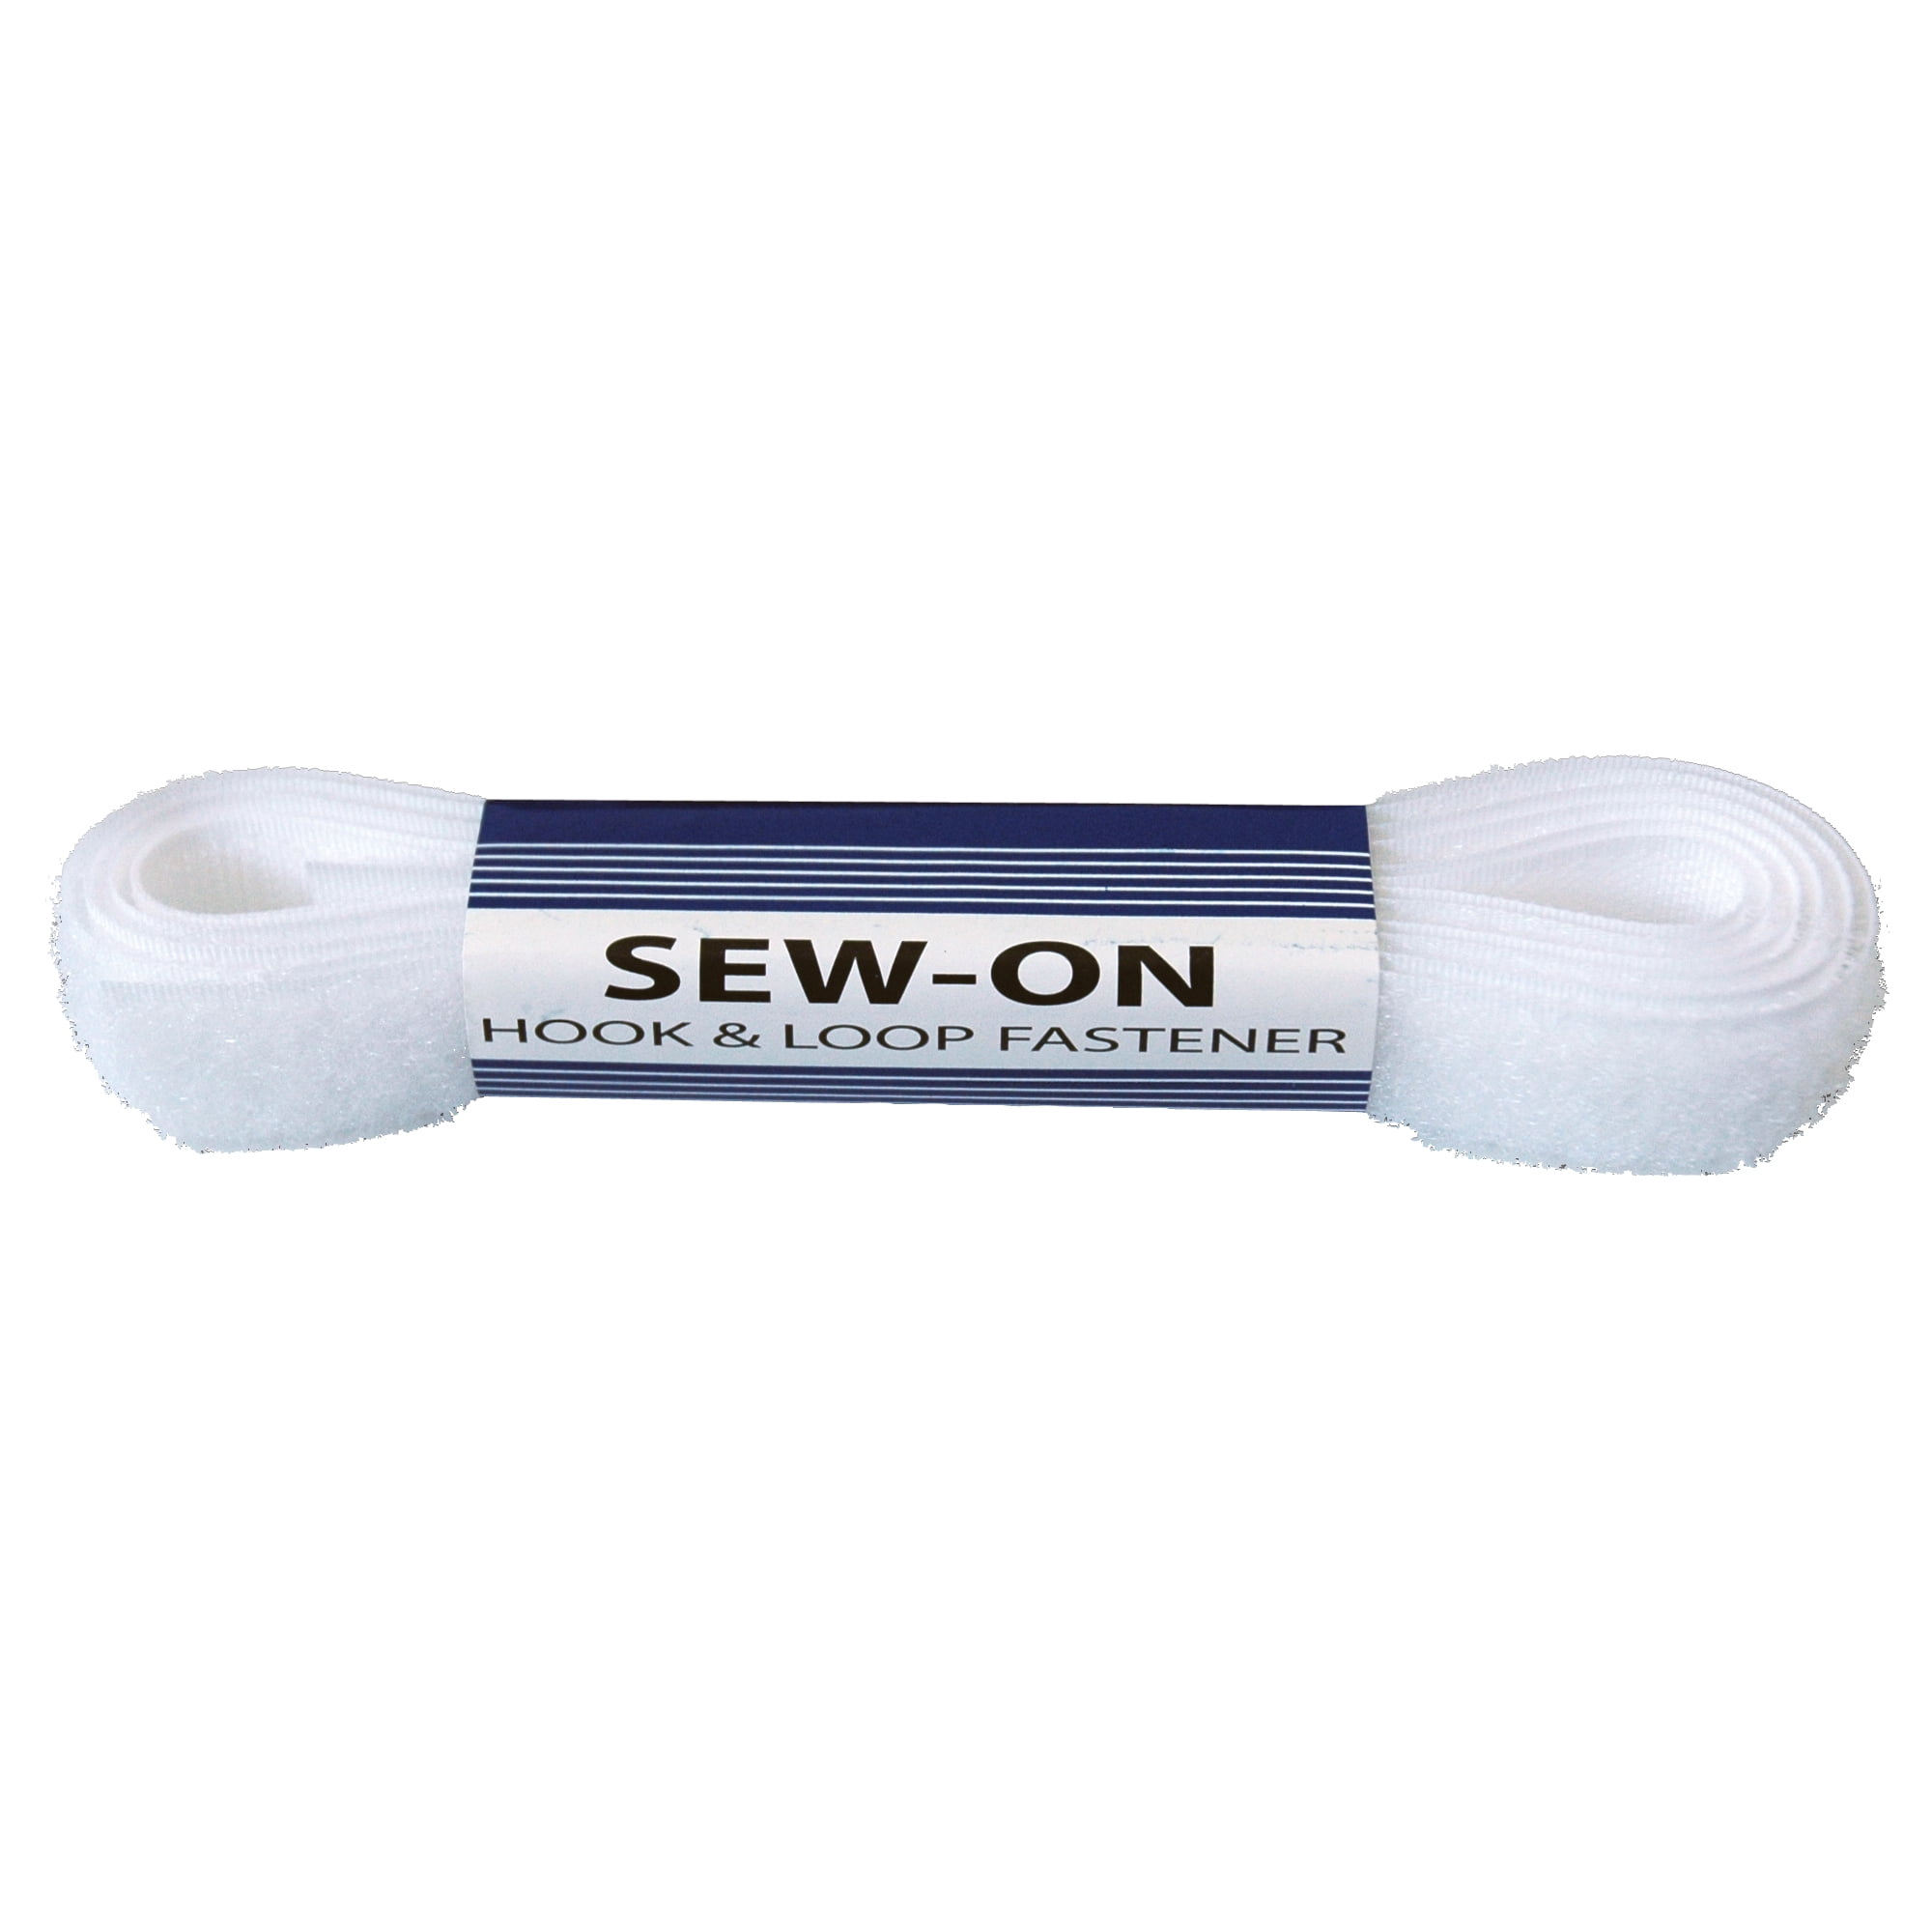  VELCRO Brand 0365477 Sew On Snag-Free Tape for Alterations and  Hemming, No Ironing or Gluing, Light Duty One-Piece Fabric Fastener